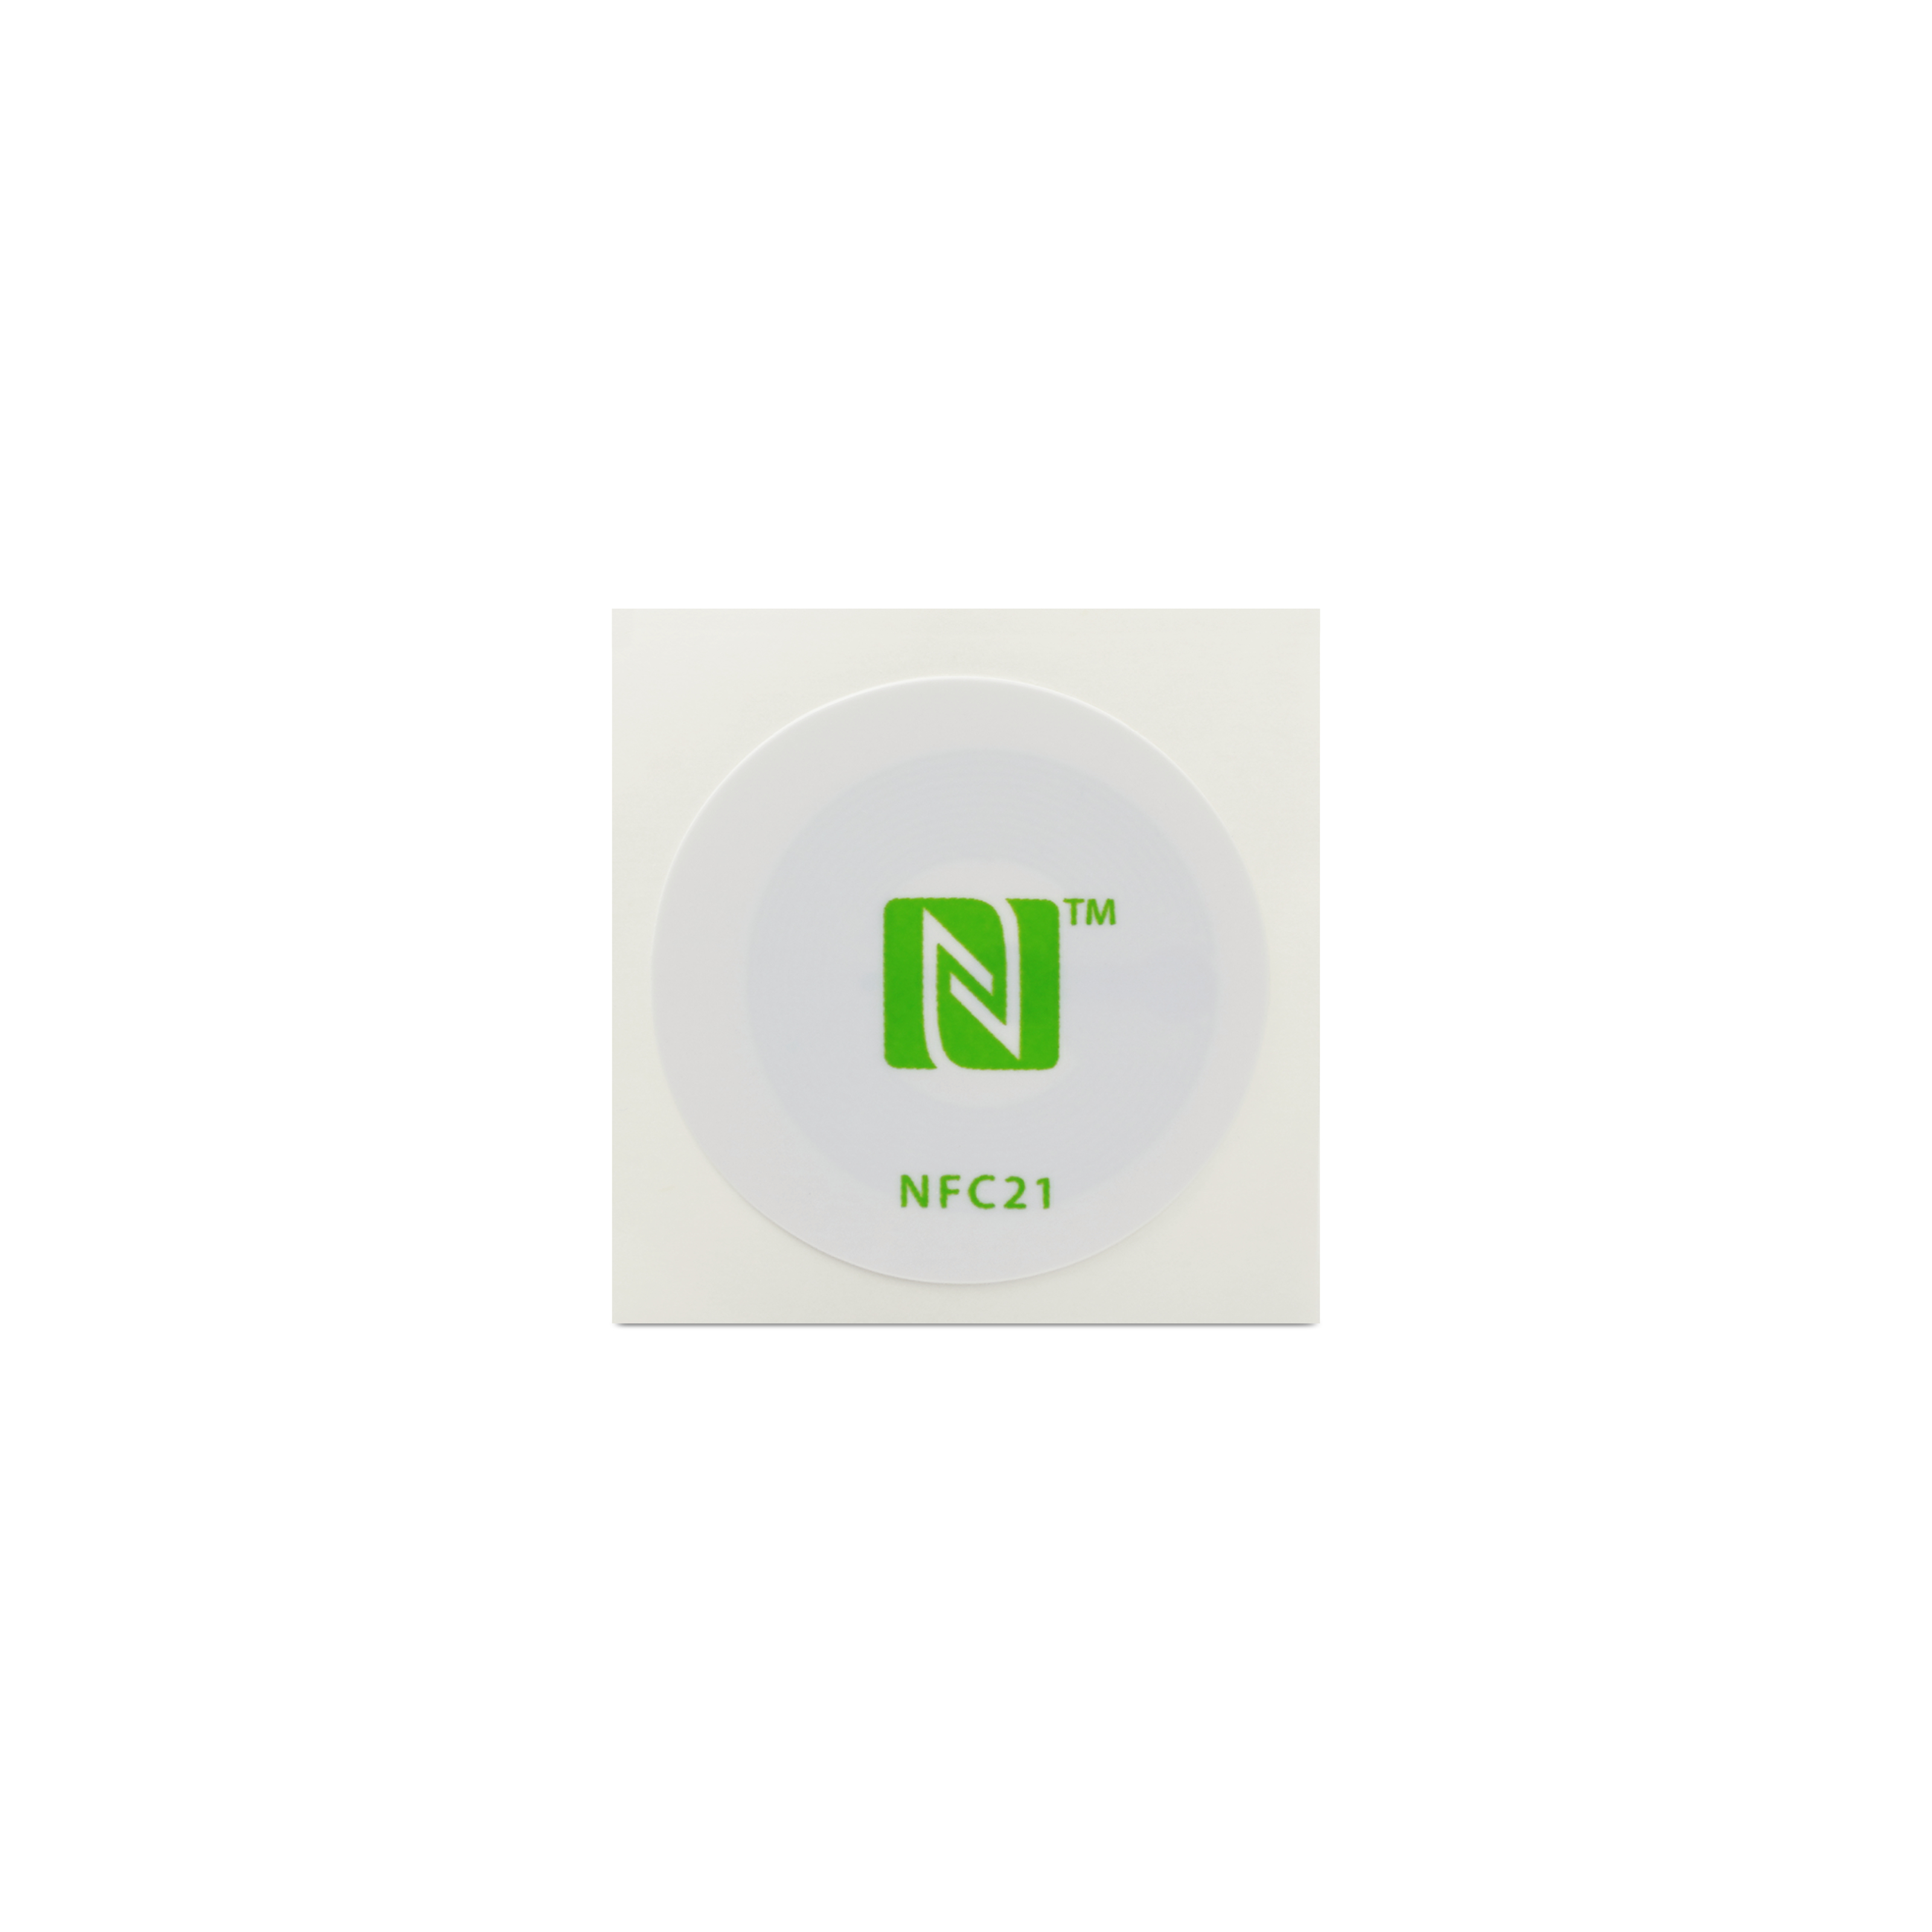 NFC Sticker PET - 30 mm - NTAG215 - 540 Byte - white with logo green